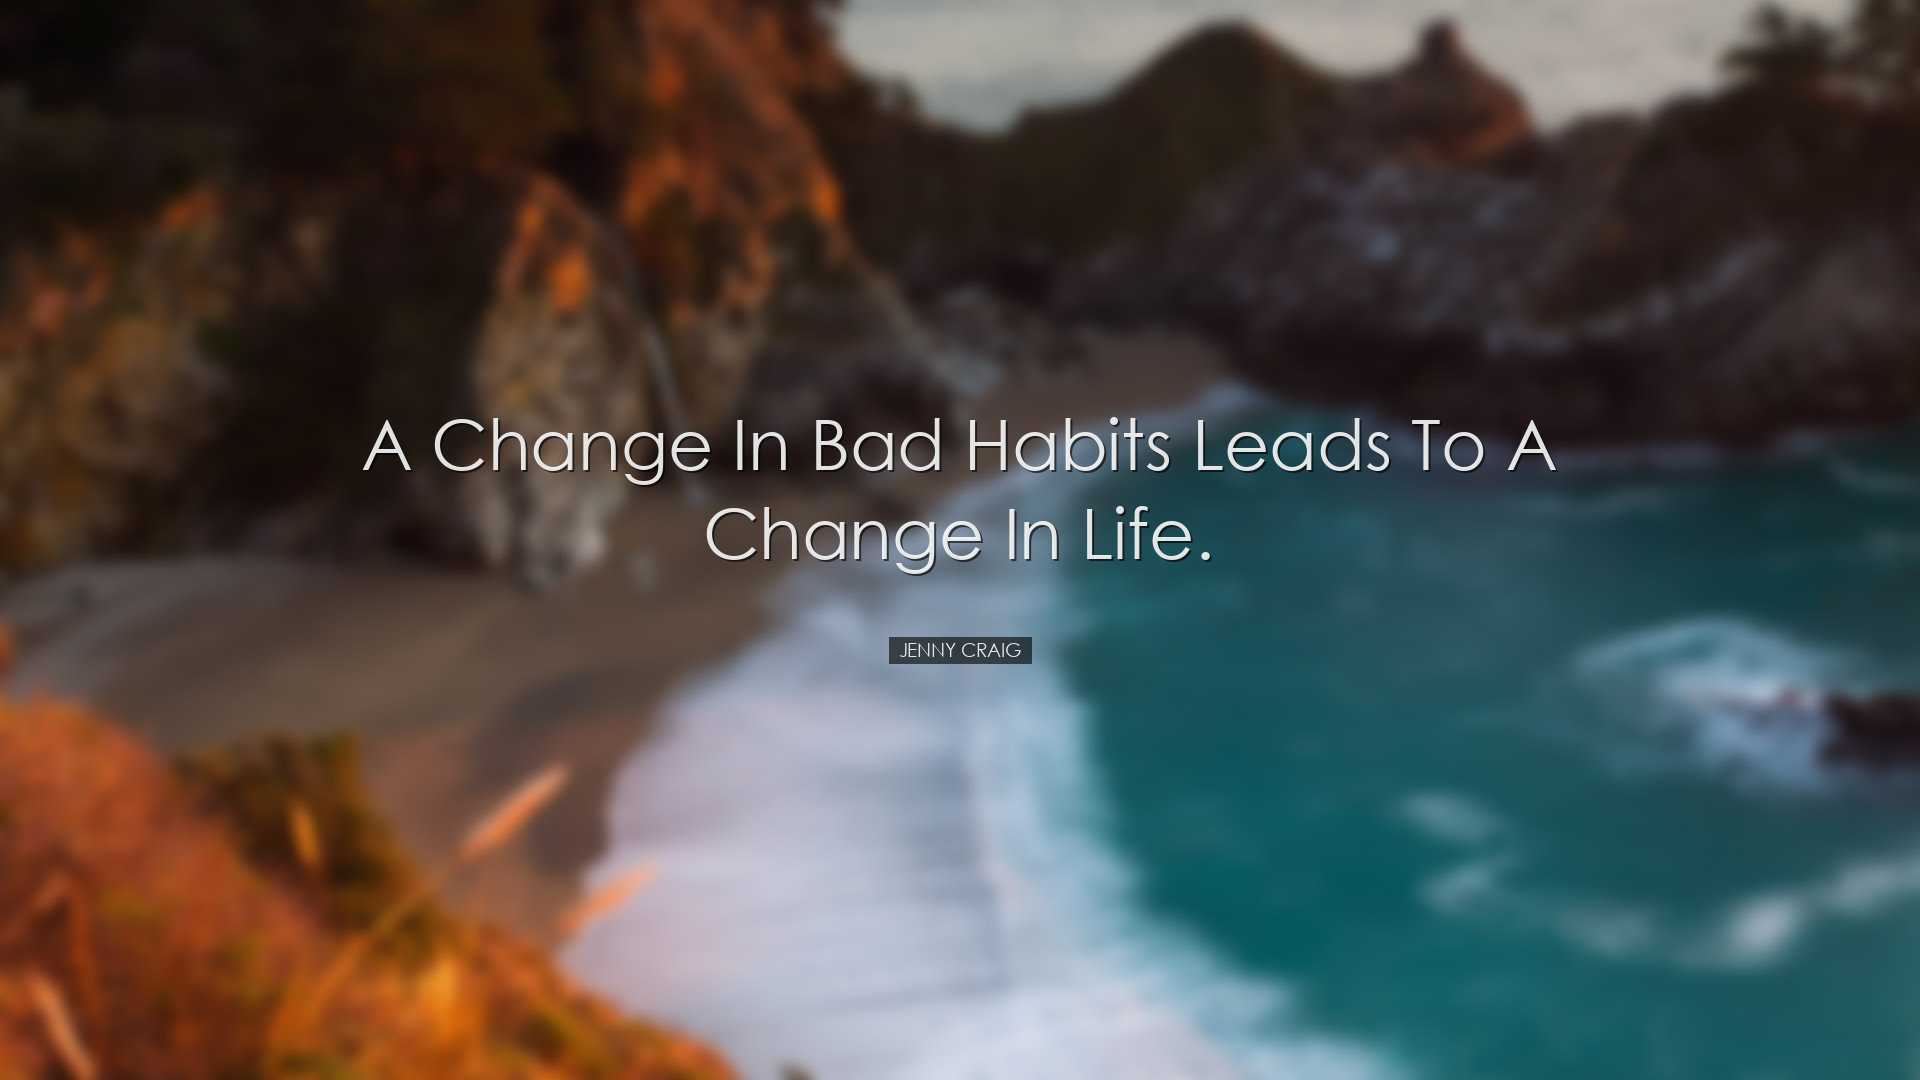 A change in bad habits leads to a change in life. - Jenny Craig